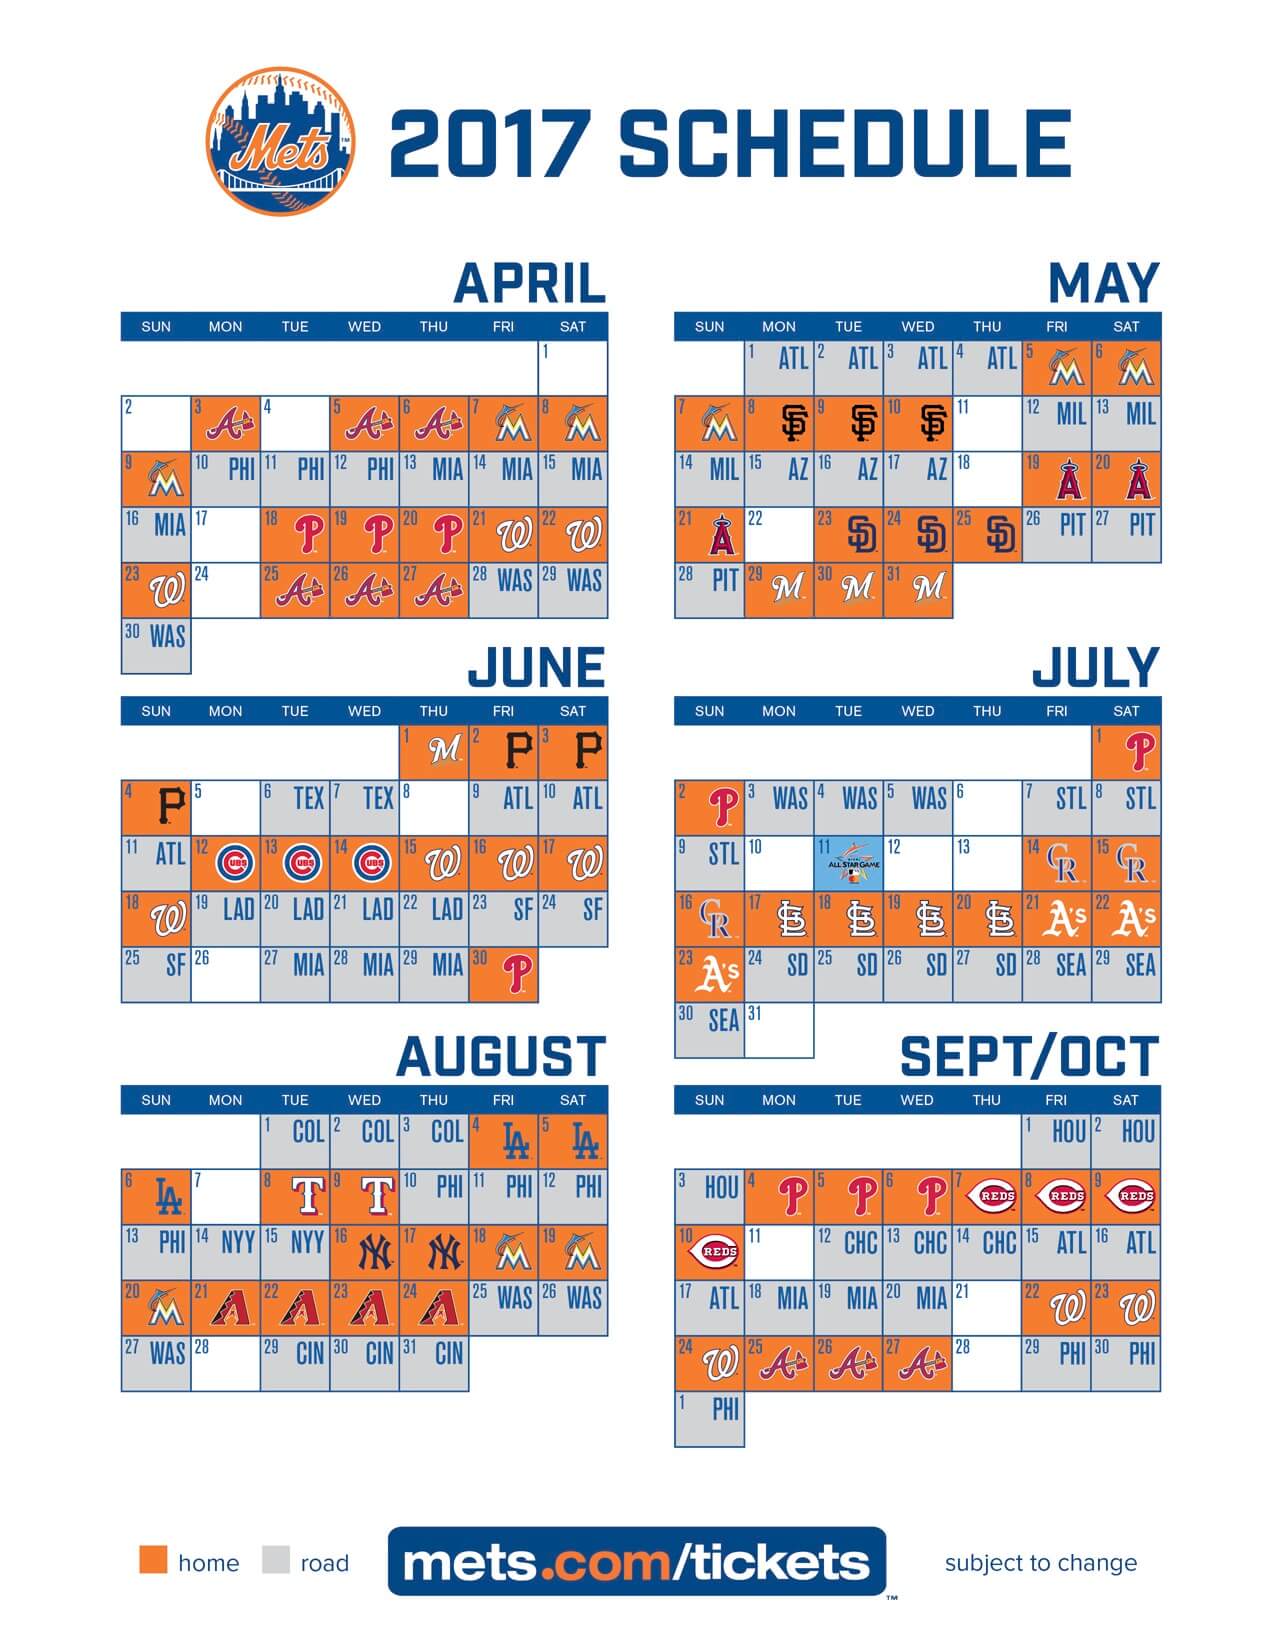 I too have The 2017 New York Mets baseball schedule! - The Mets Police